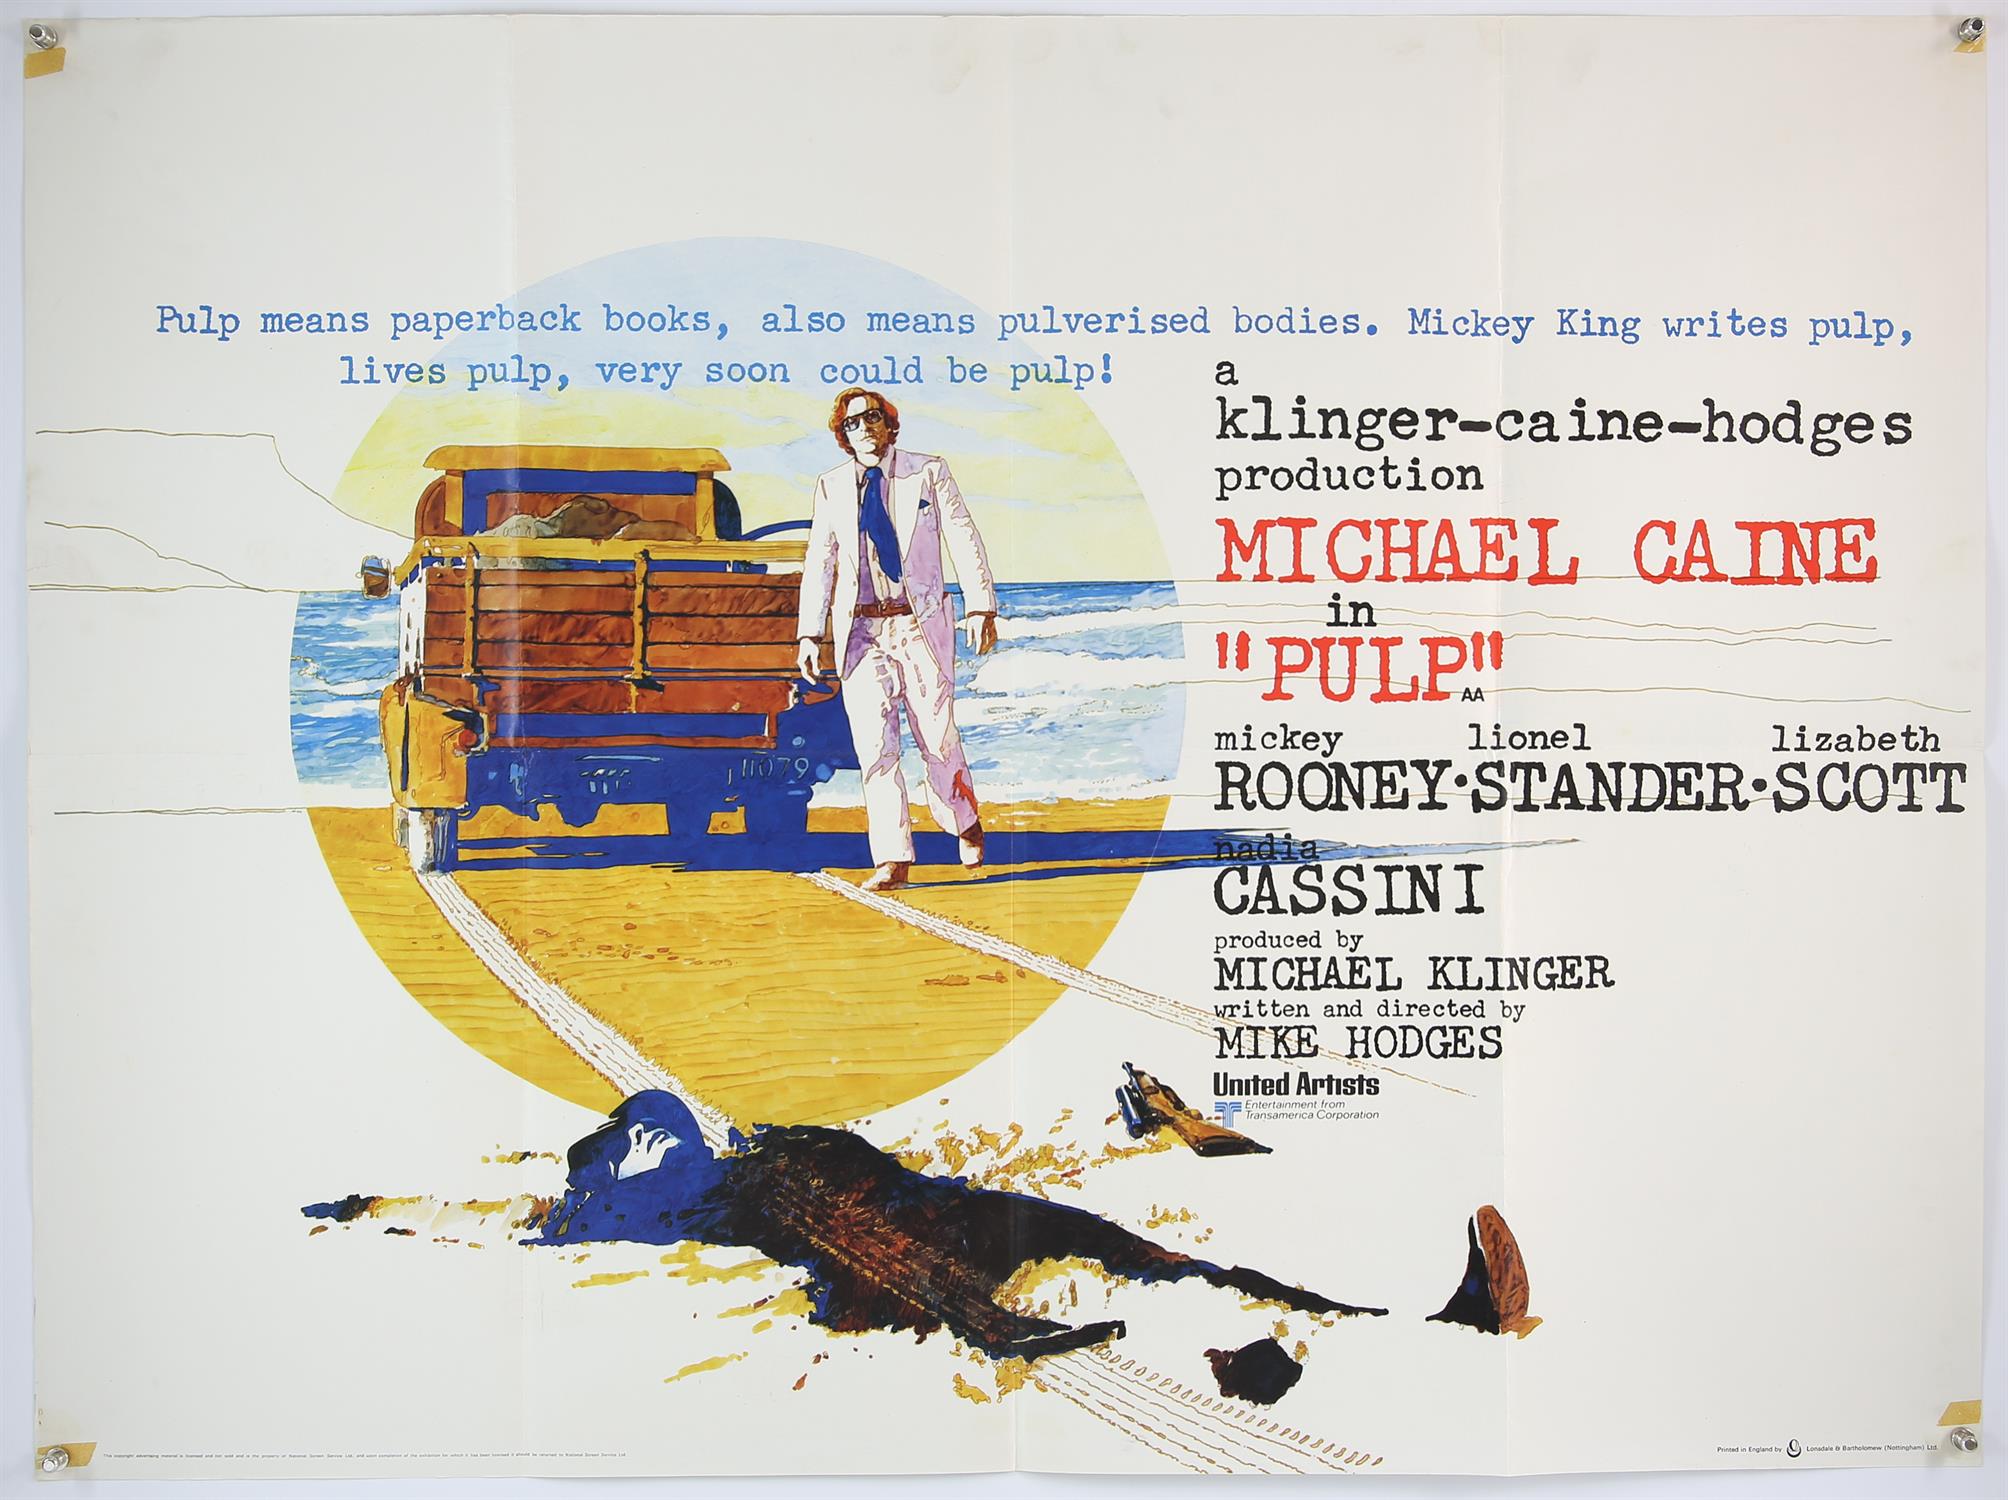 Five British Quad film posters from the 1970’s including The Poseidon Adventure (1972), - Image 2 of 3